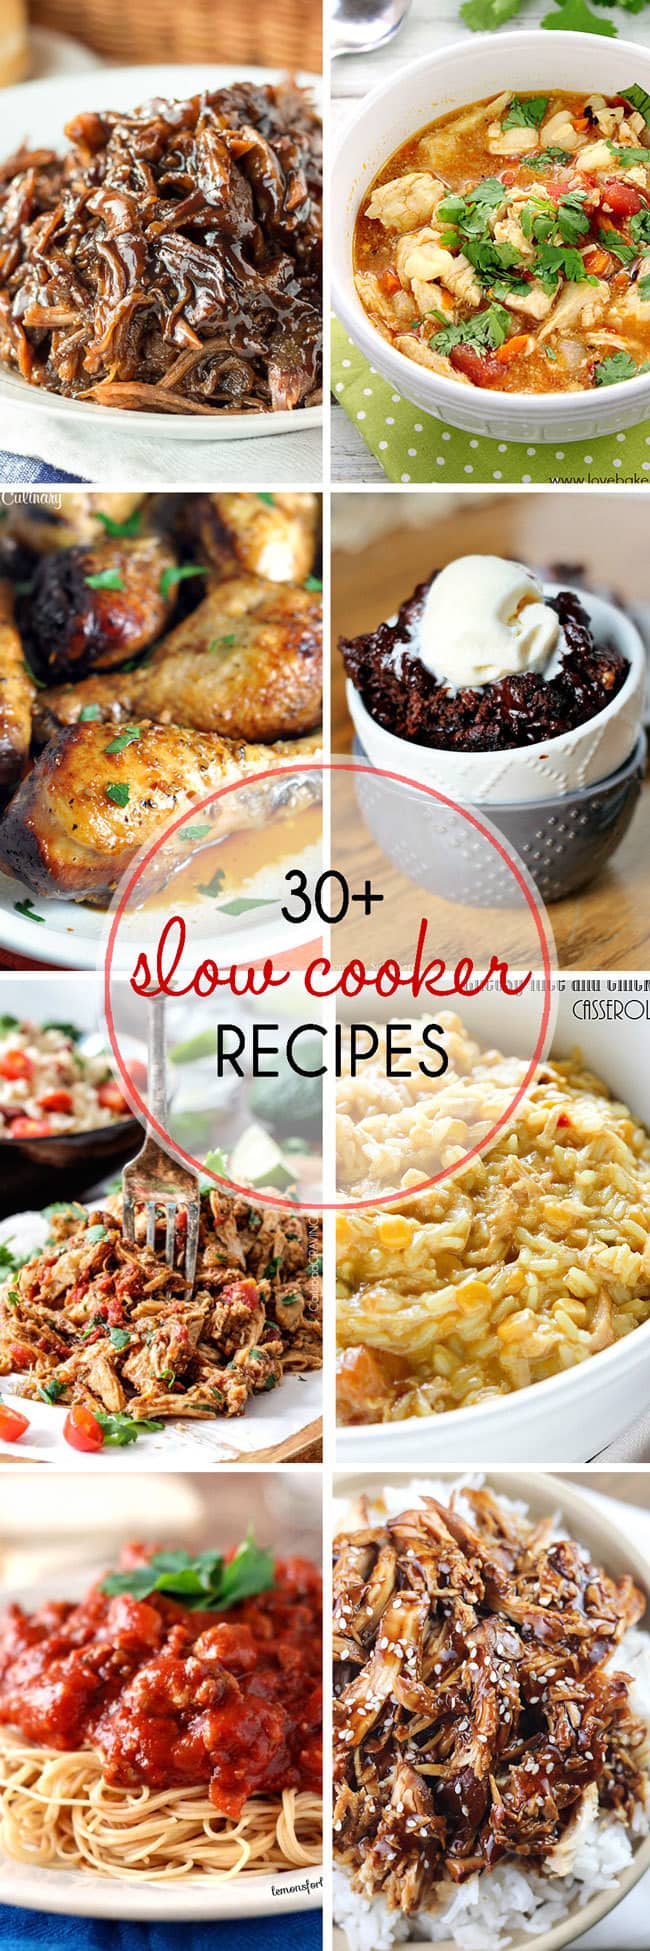 30+ Must-Try Slow Cooker Recipes! Grab your crock pot and get cooking! All different types of great slow cooker recipes in this roundup, from main dish to dessert. Check it out! yummyhealthyeasy.com